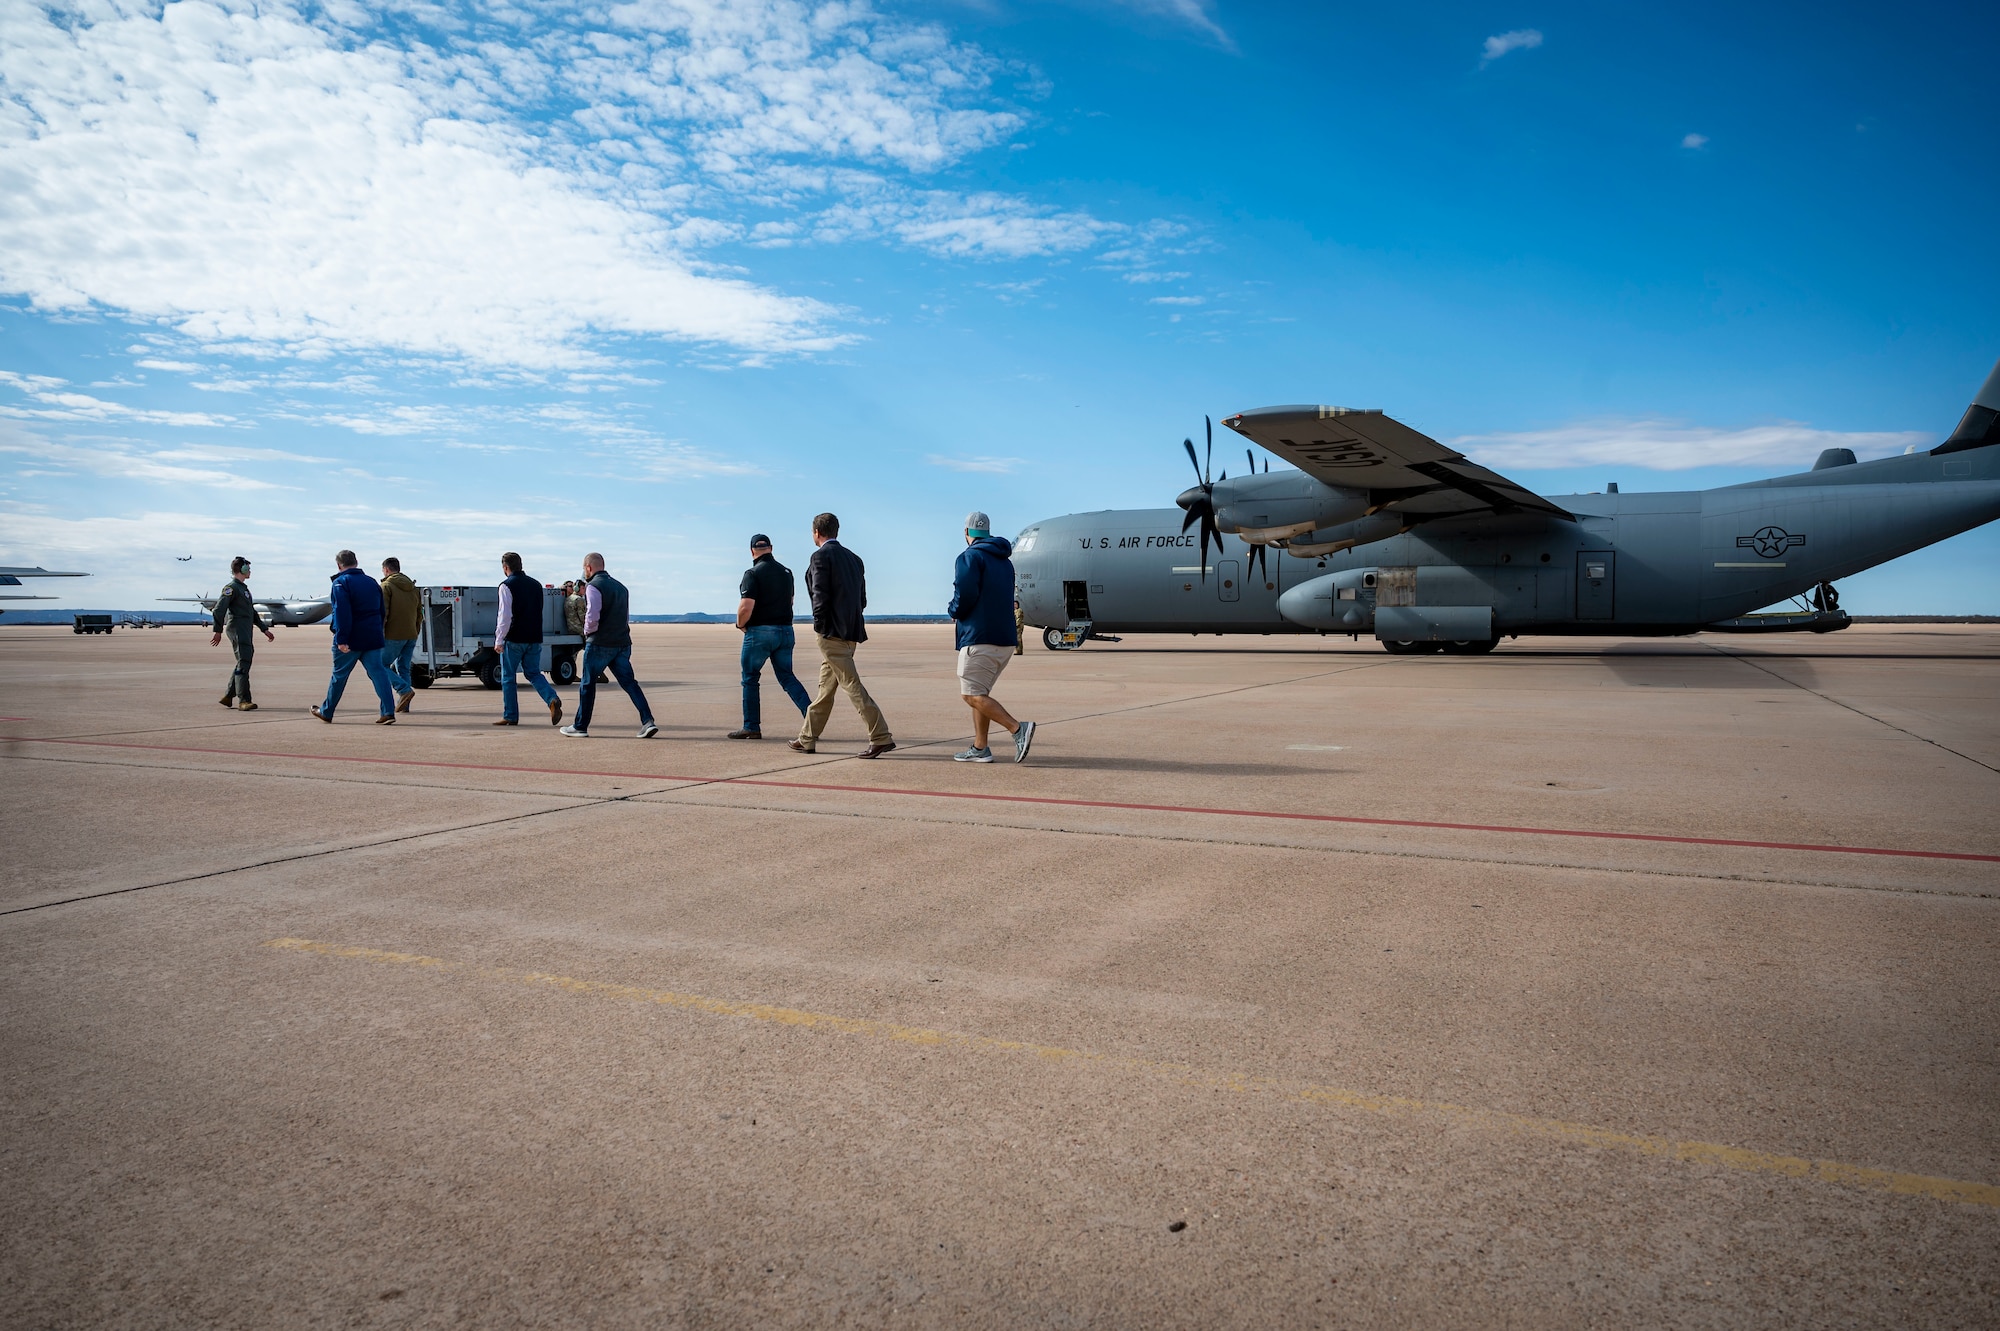 A group of honorary commander inductees walk towards a C-130J Super Hercules during an honorary commander induction tour incentive flight at Dyess Air Force Base, Texas, Jan. 20, 2023. The Honorary Commanders Program is an executive-level program intended to educate community members who have limited knowledge of the Air Force and Dyess to foster public support for the base and its Airmen and families. (U.S. Air Force photo by Senior Airman Leon Redfern)